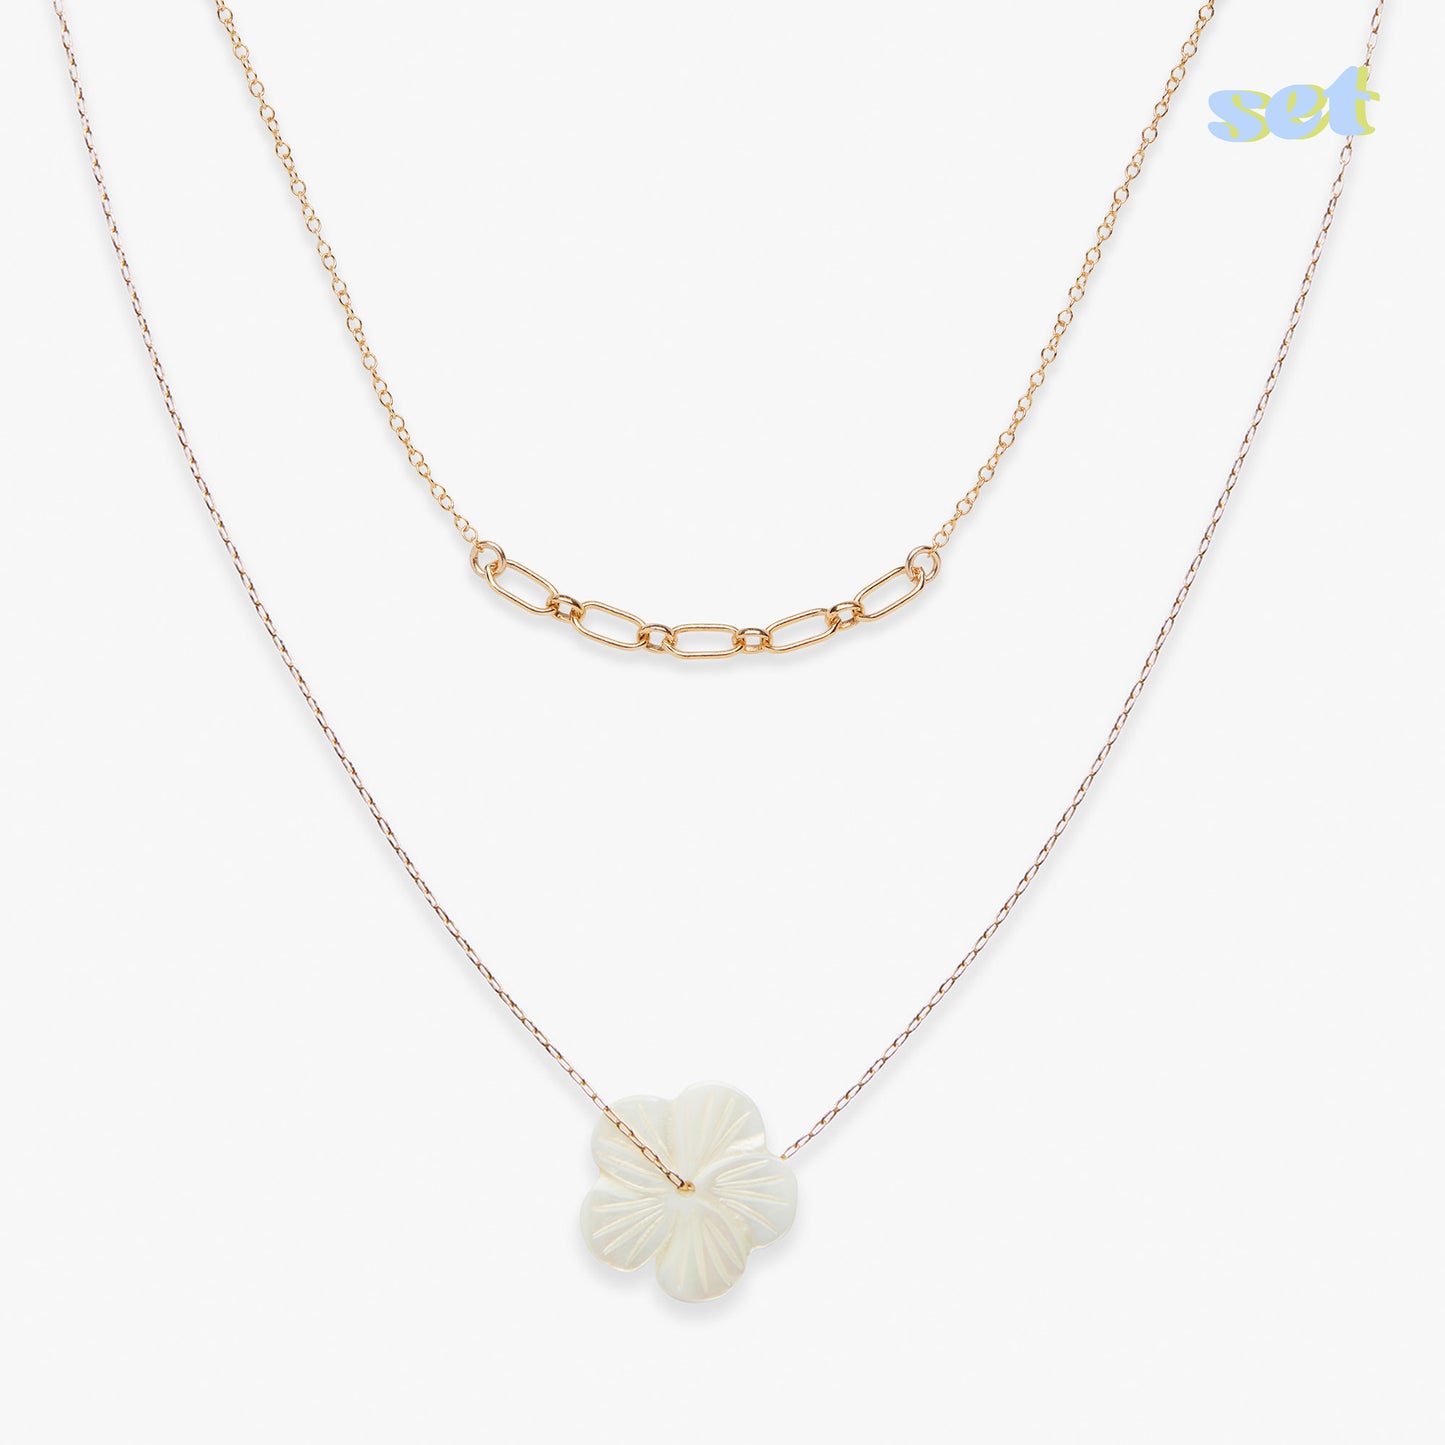 Cool Wildflower necklace set gold filled